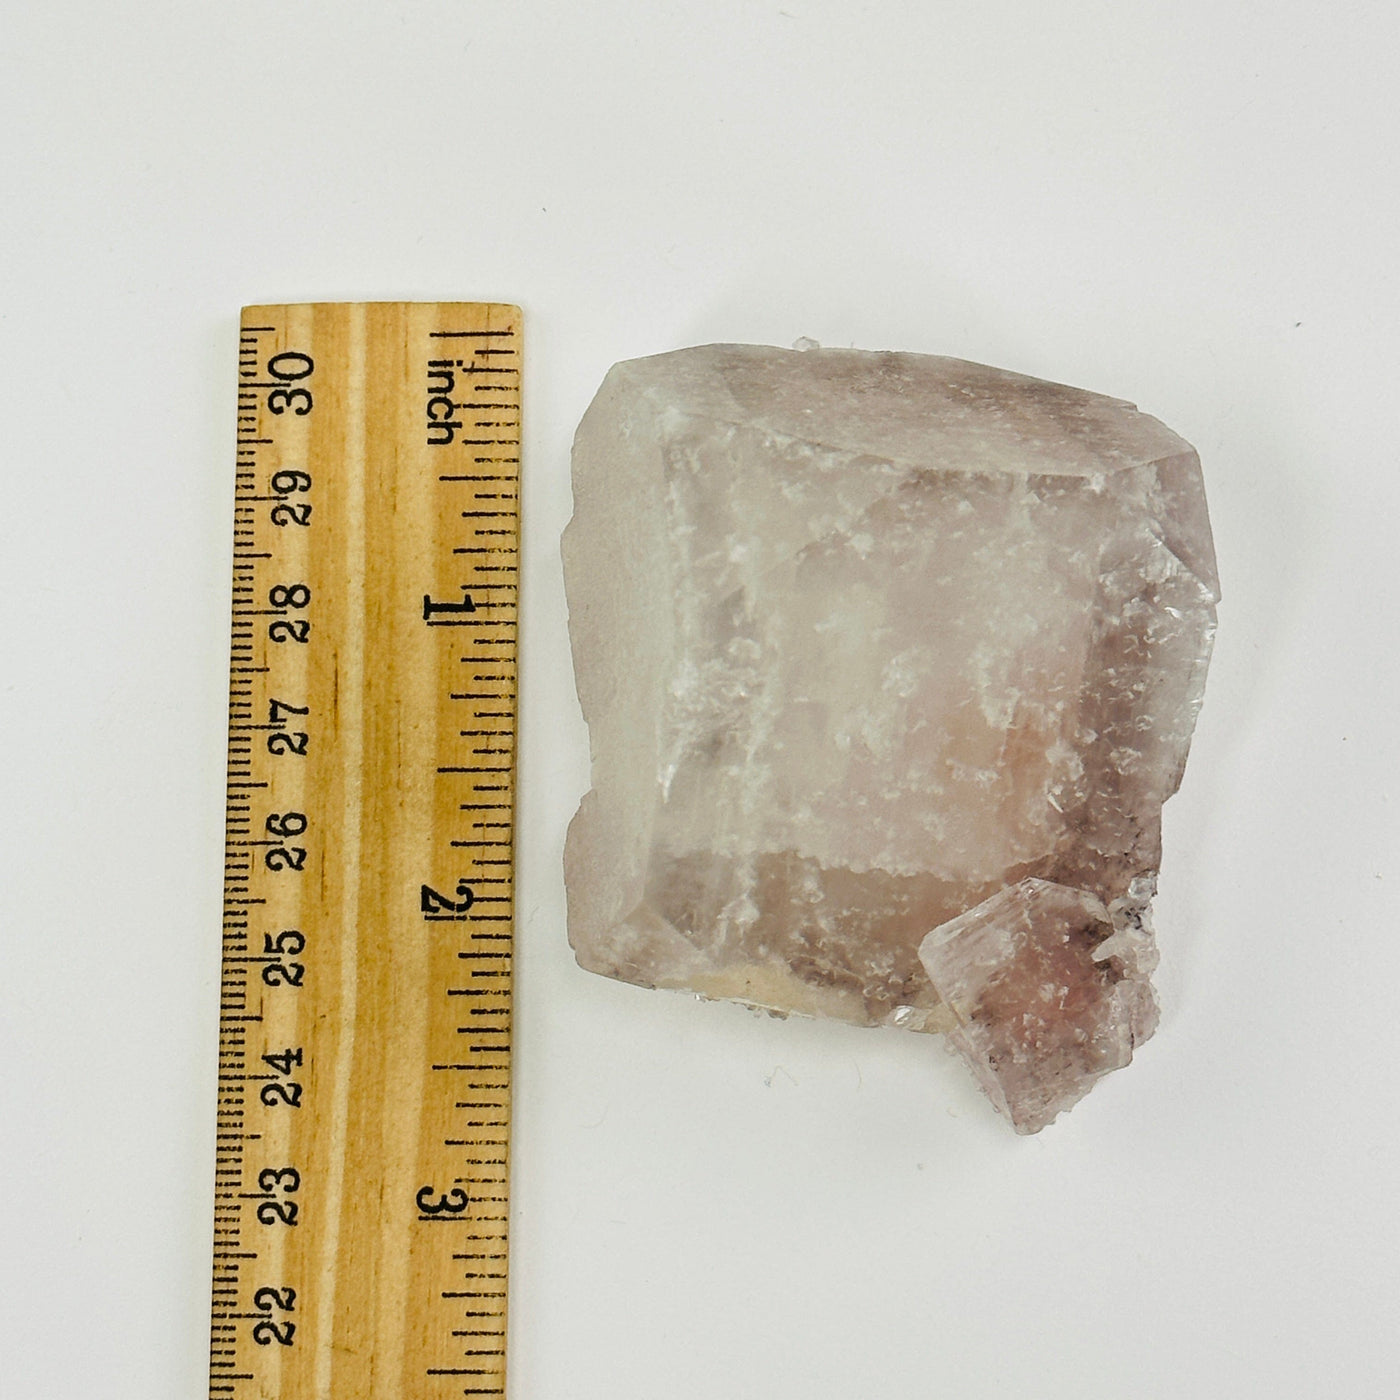 apophyllite cluster next to a ruler for size reference